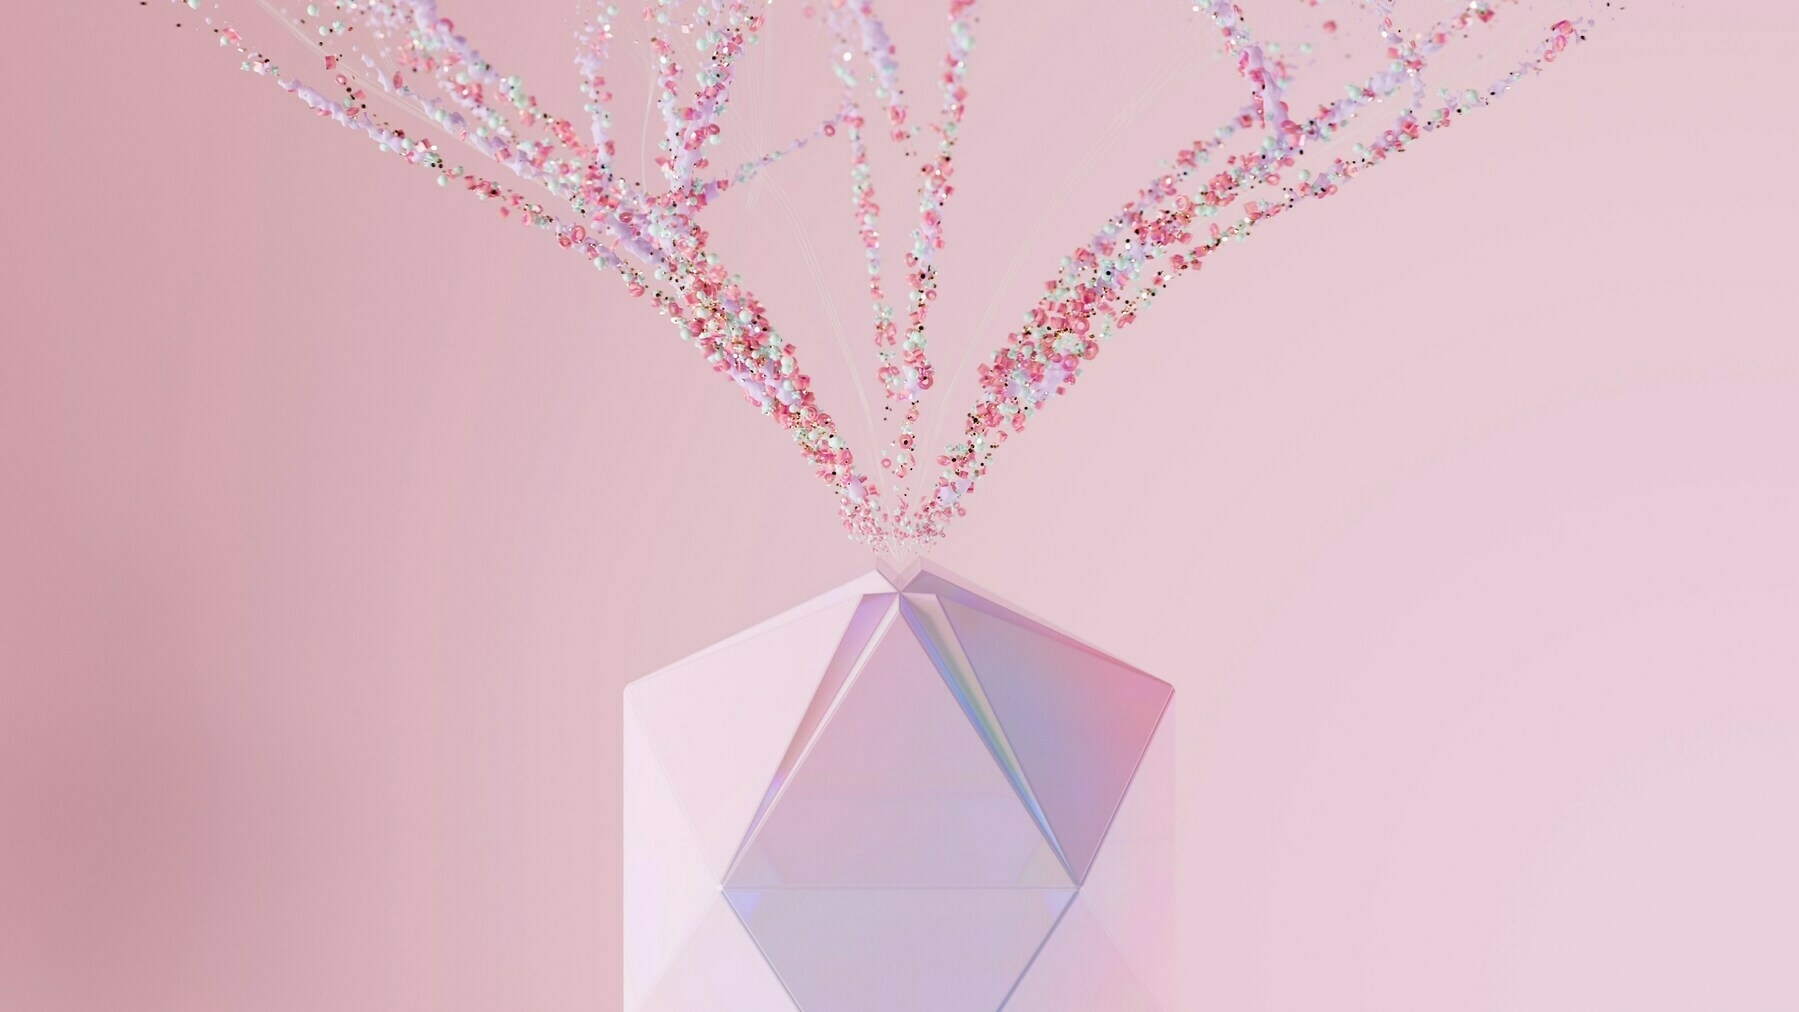 Geometric crystal with a sparkling eruption of pink particles on a soft pink background, resembling a stylized, fantastical display.